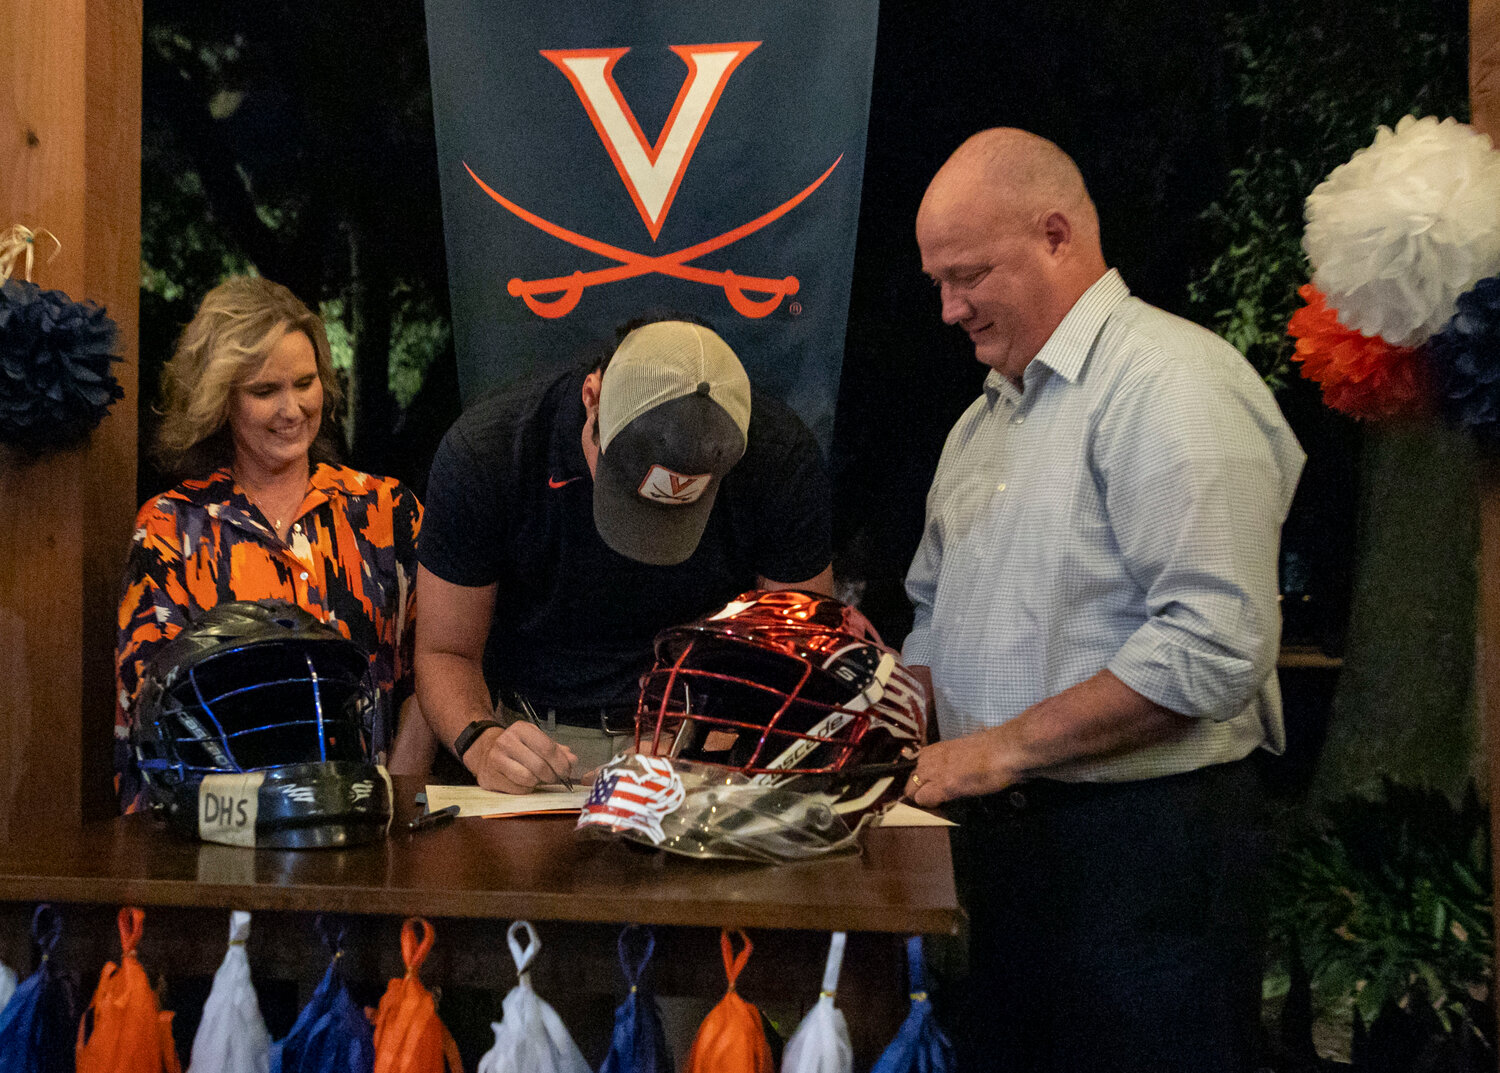 Troy Capstraw became the newest signee for the Virginia Cavalier Lacrosse program during a Wednesday signing ceremony in Daphne. A four-star goalie recruit, Capstraw chose Virginia over other top choices including UNC, Duke and Jacksonville.